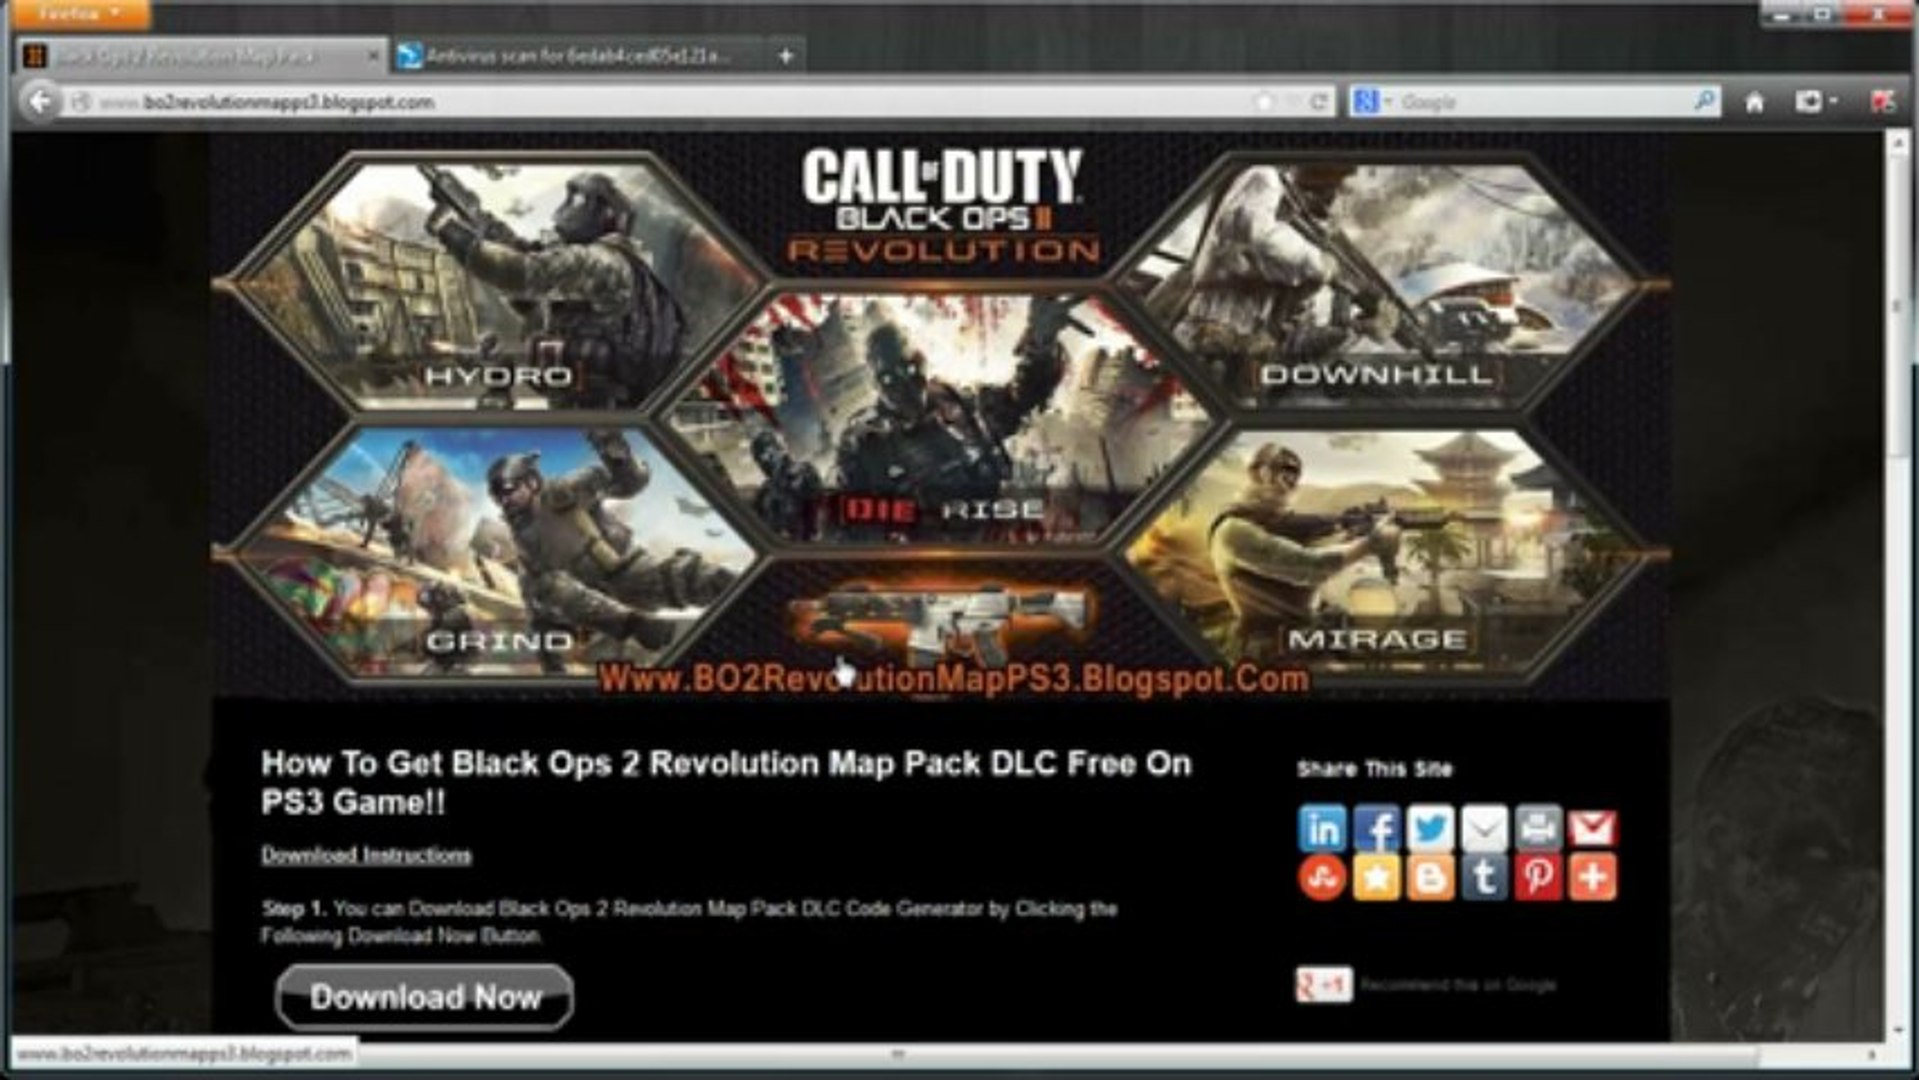 How to Get Black Ops 2 Revolution Map Pack DLC Free!! - video Dailymotion